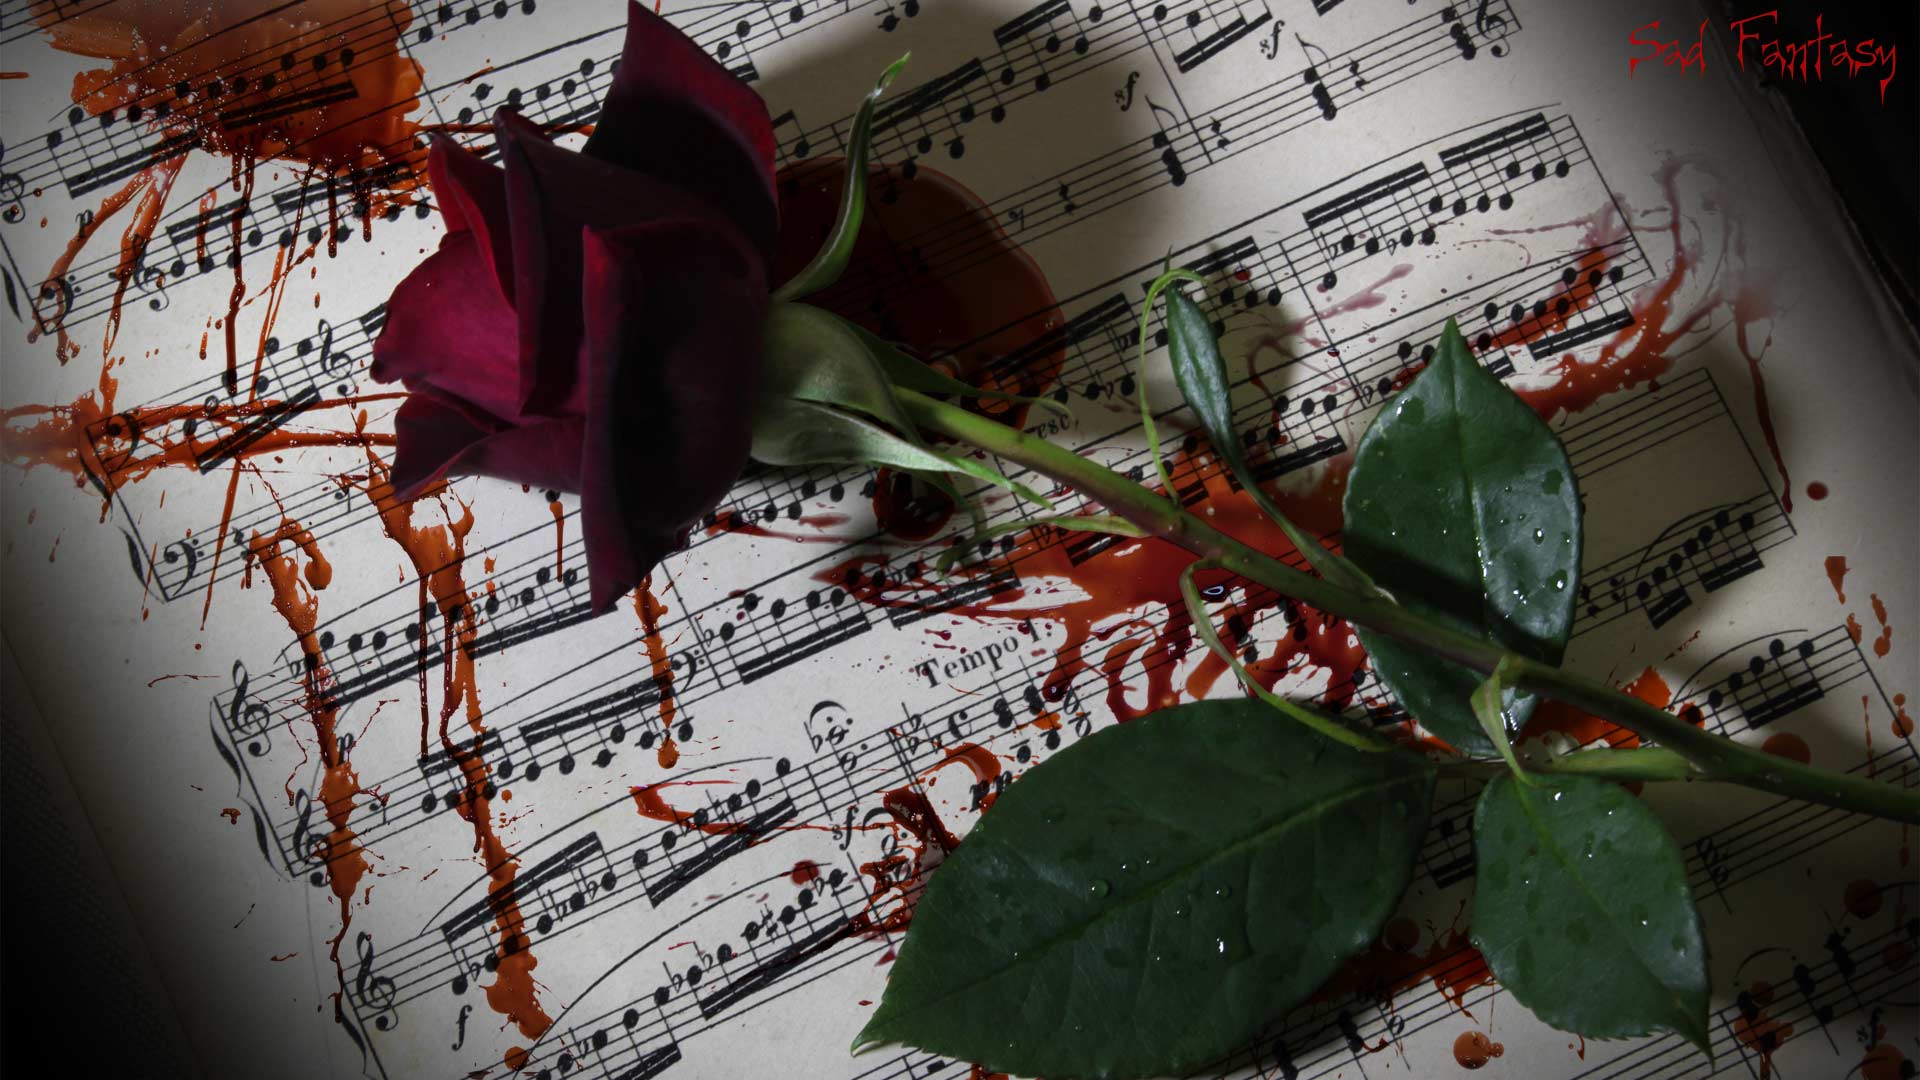 Romantic image of a rose blood and music by Sad Fantasy